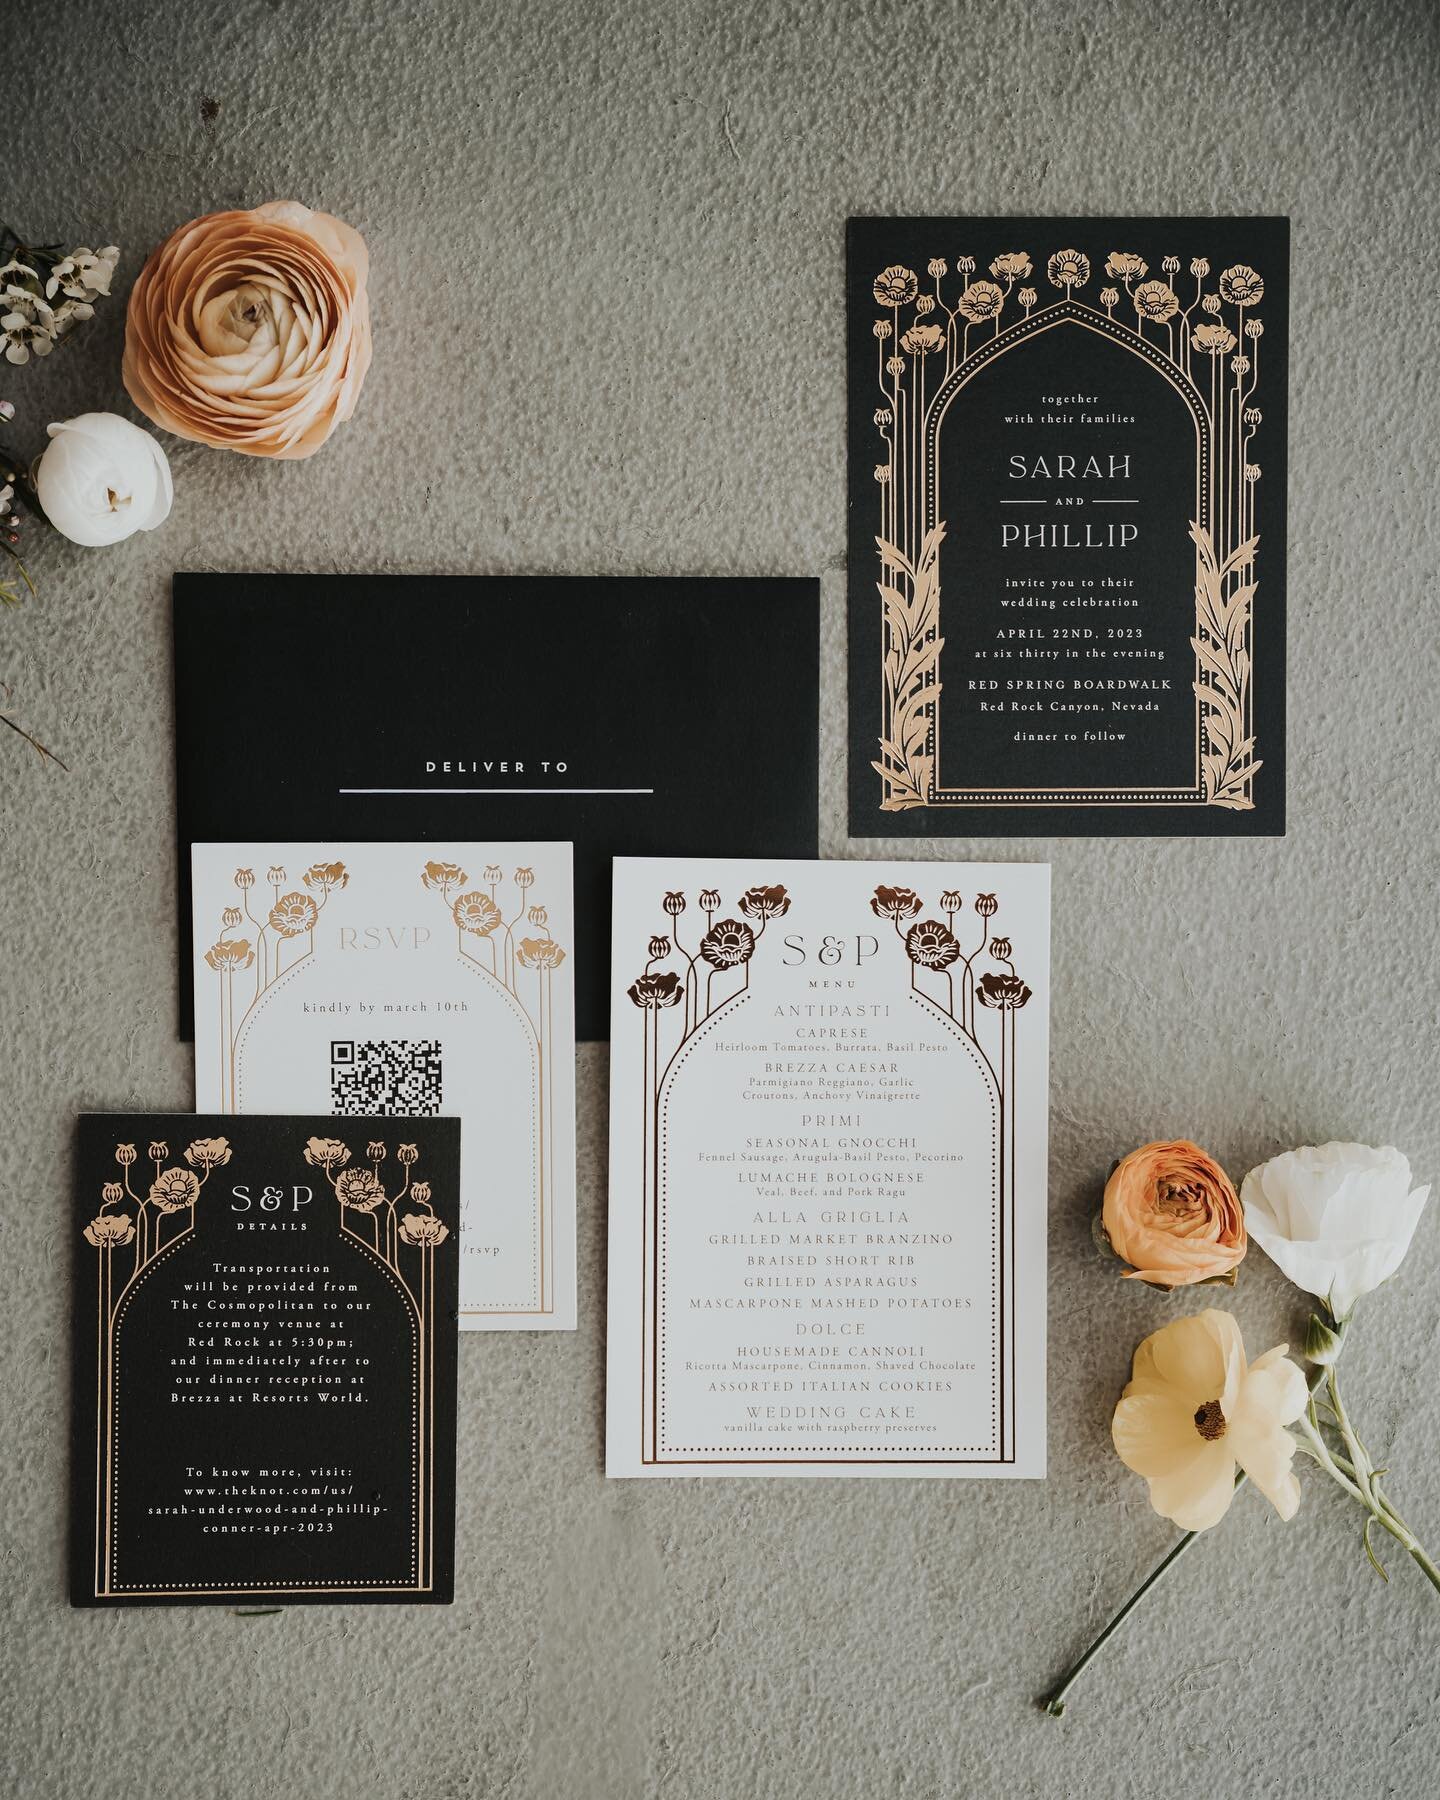 Don&rsquo;t mind me staring at all the textures from Sarah &amp; Phillip&rsquo;s stationery. I love the bold colors contrasted with the shiny rose gold foil. Can we also take a moment to appreciate Jamie&rsquo;s composition of having these displayed 